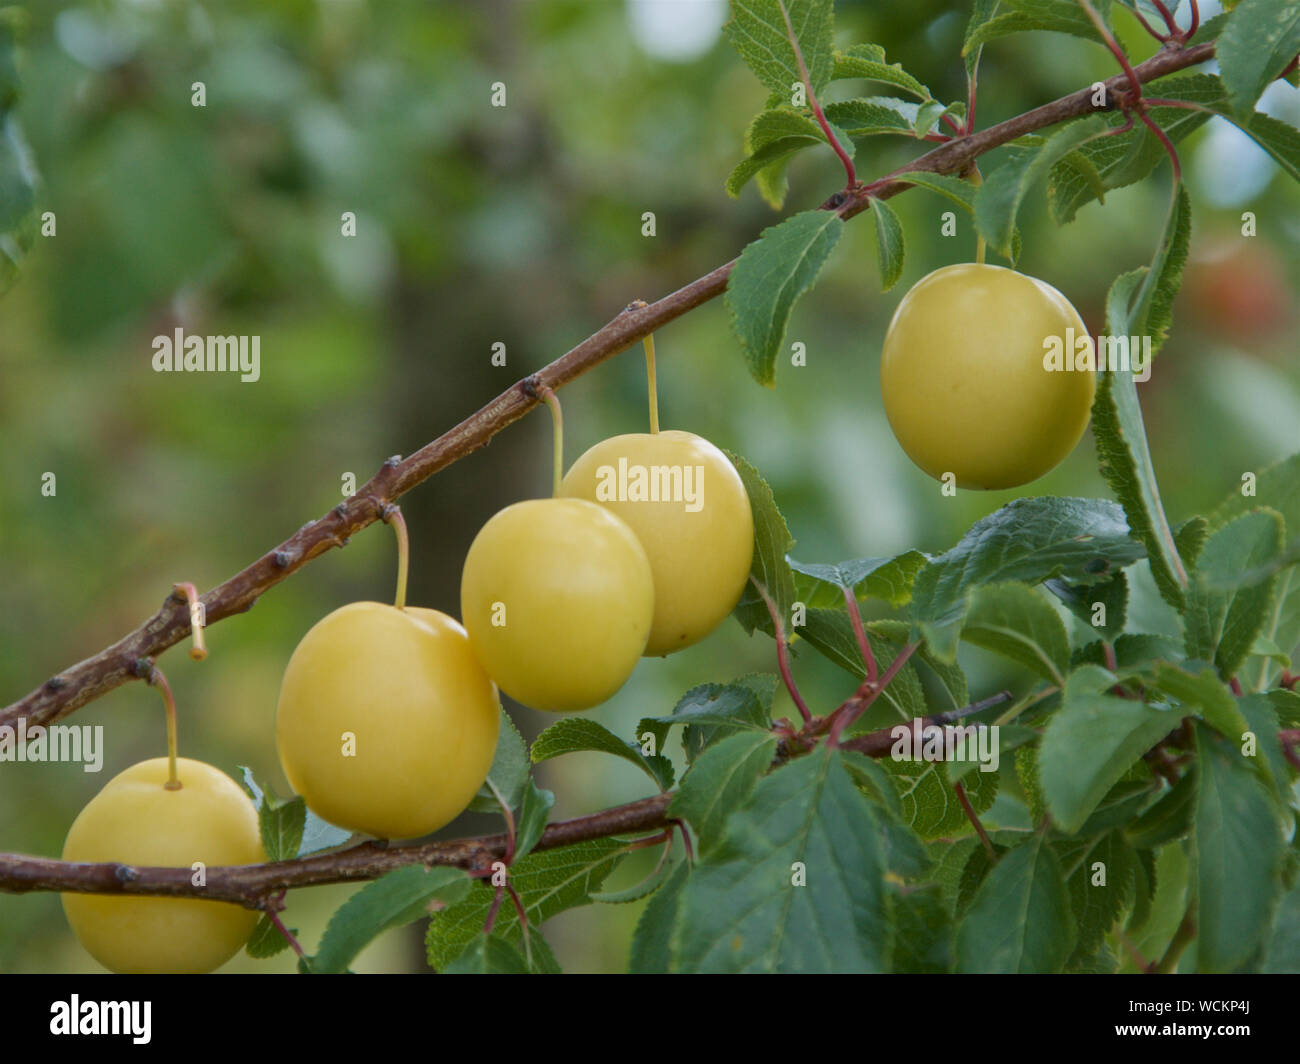 Golden yellow Mirabelle plums growing and ripening on the tree. Stock Photo